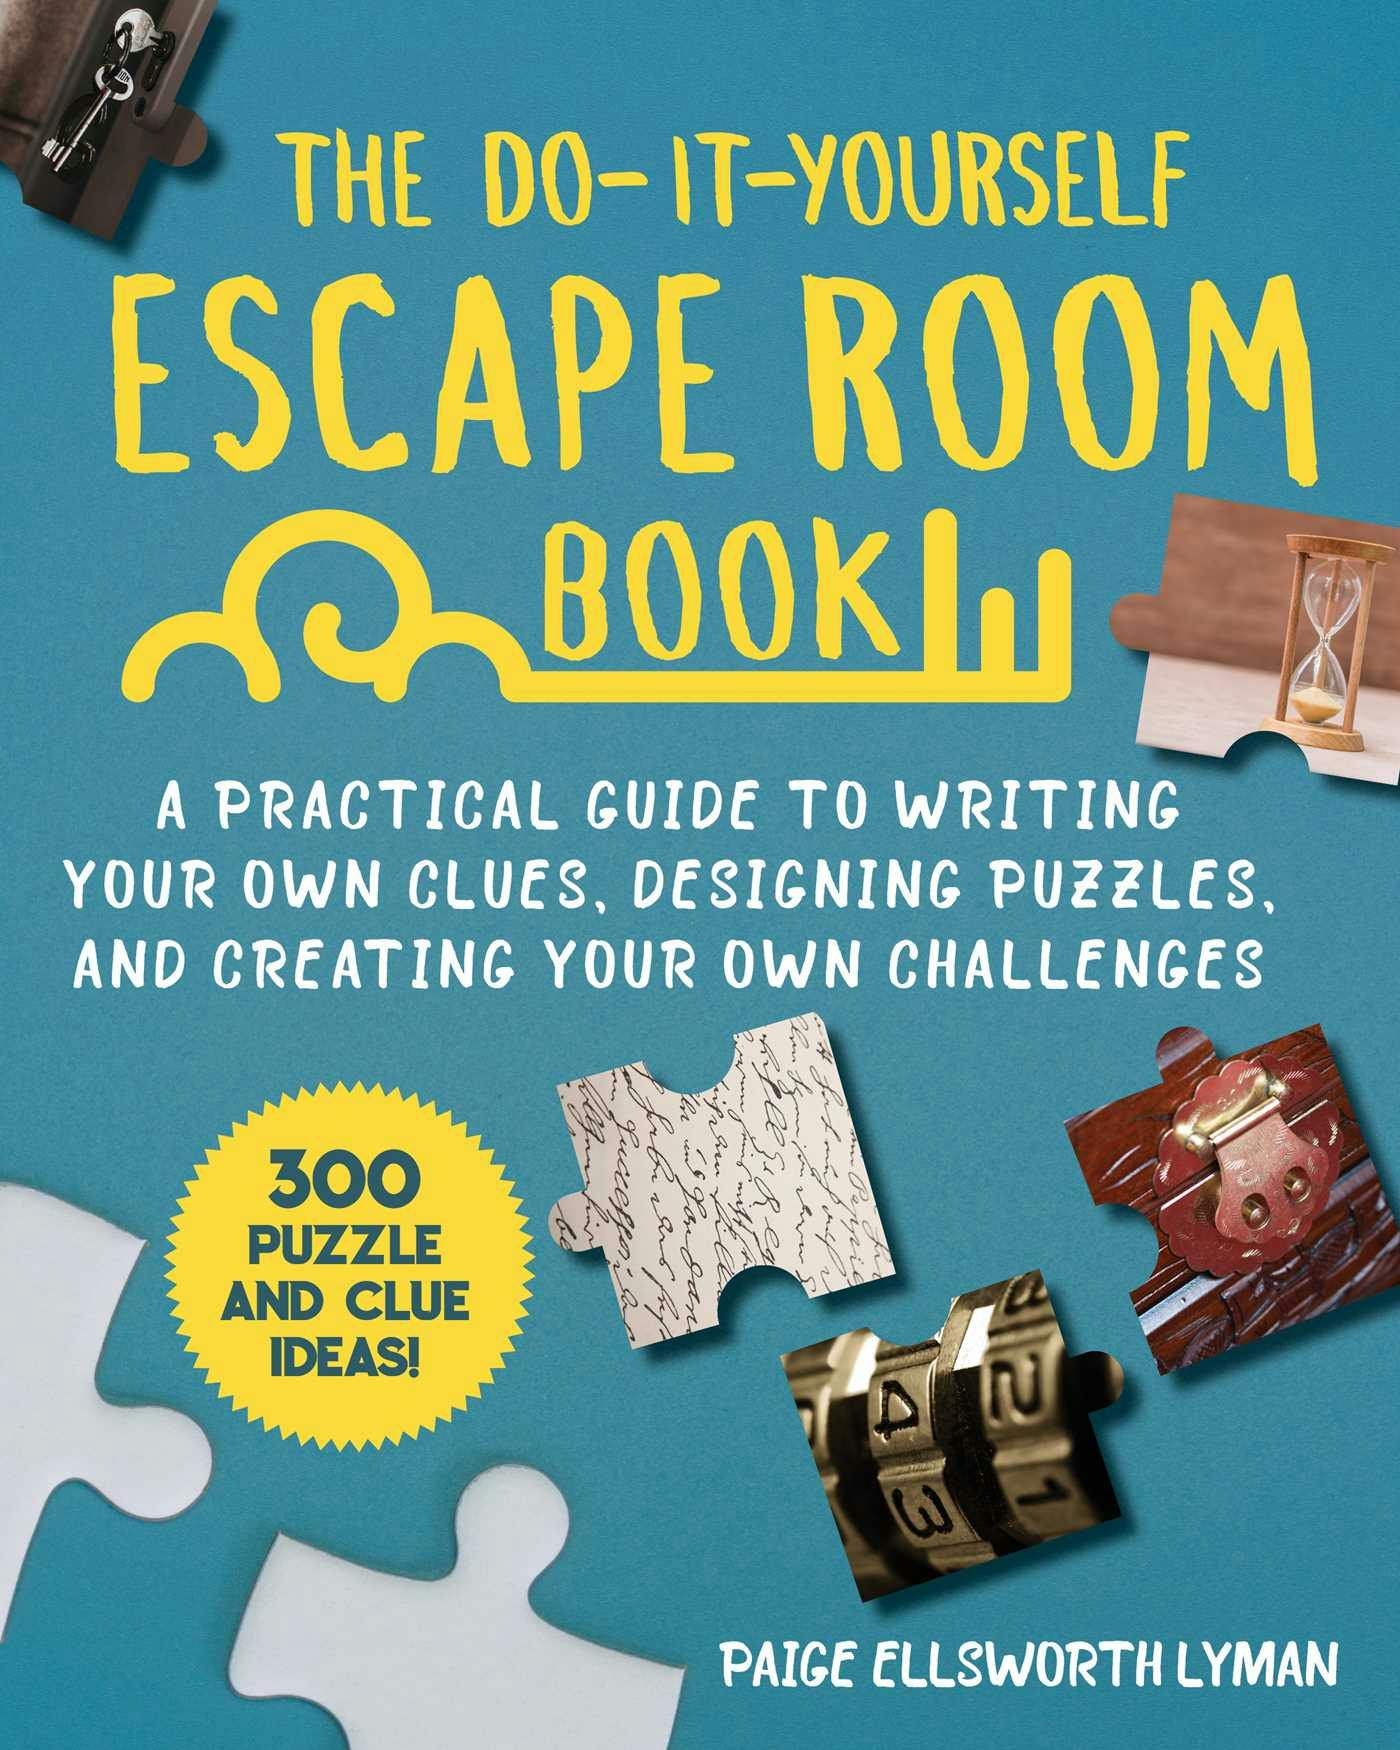 The Do-It-Yourself Escape Room Book: A Practical Guide To Writing Your Own  Clues, Designing Puzzles, And Creating Your Own Challenges, E-book, Paige  Ellsworth Lyman